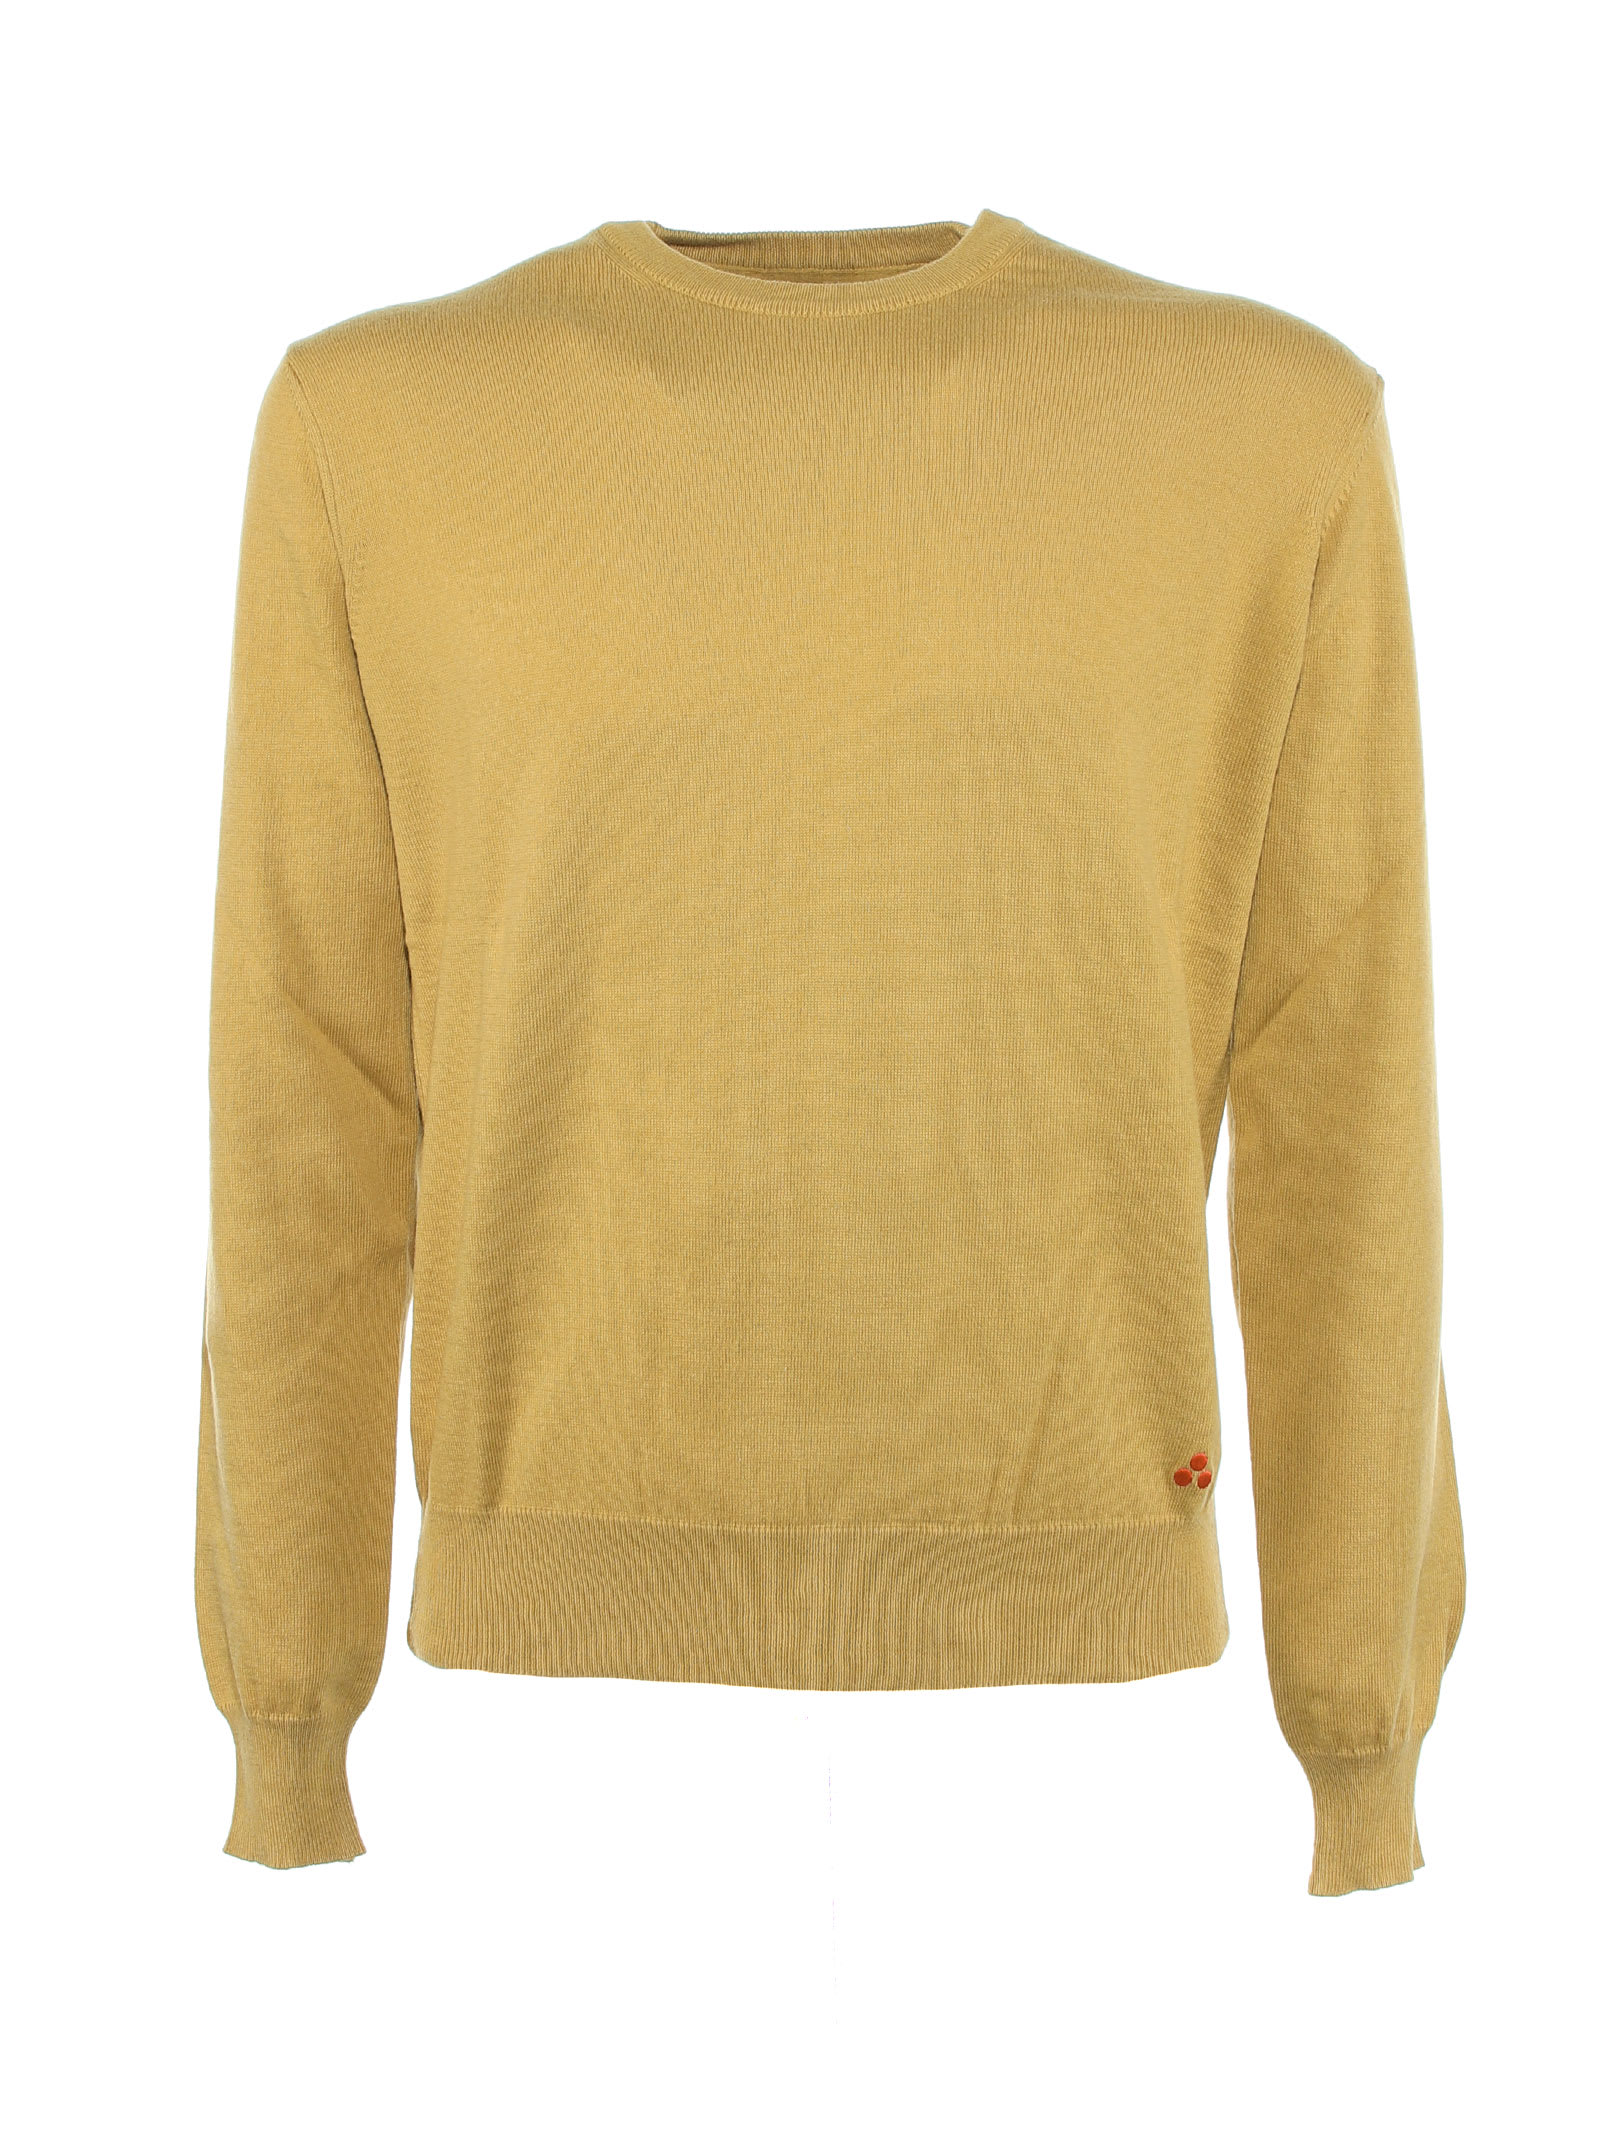 Peuterey Sweater With Elbow Patches In Ocra